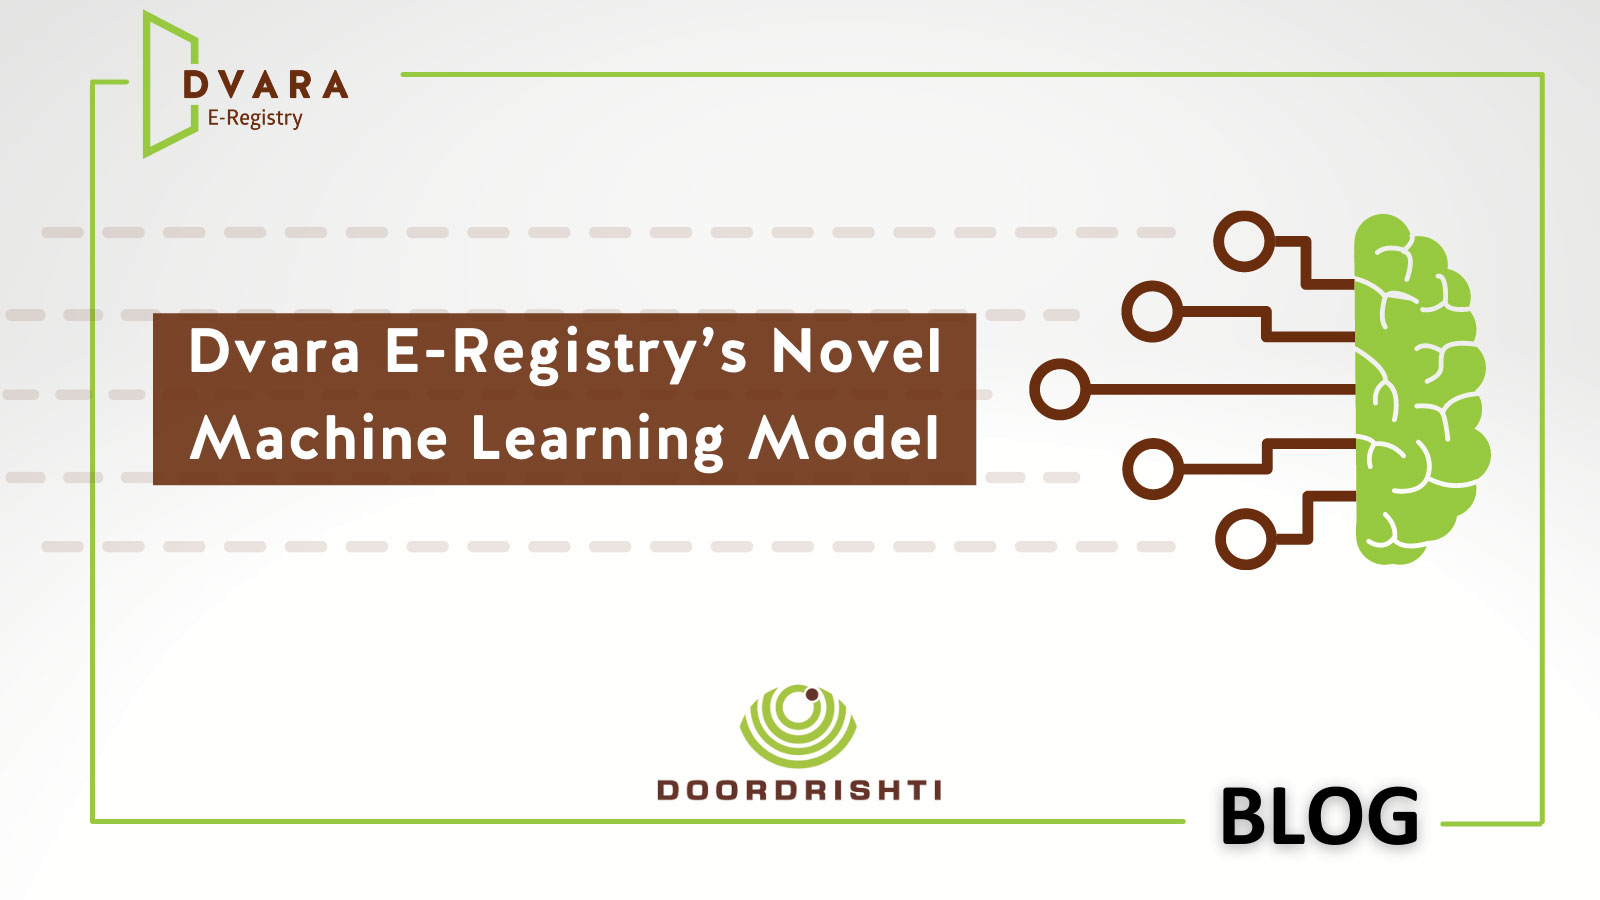 Dvara E-Registry’s Deep Learning Model Allows Observations Through Cloud Cover.